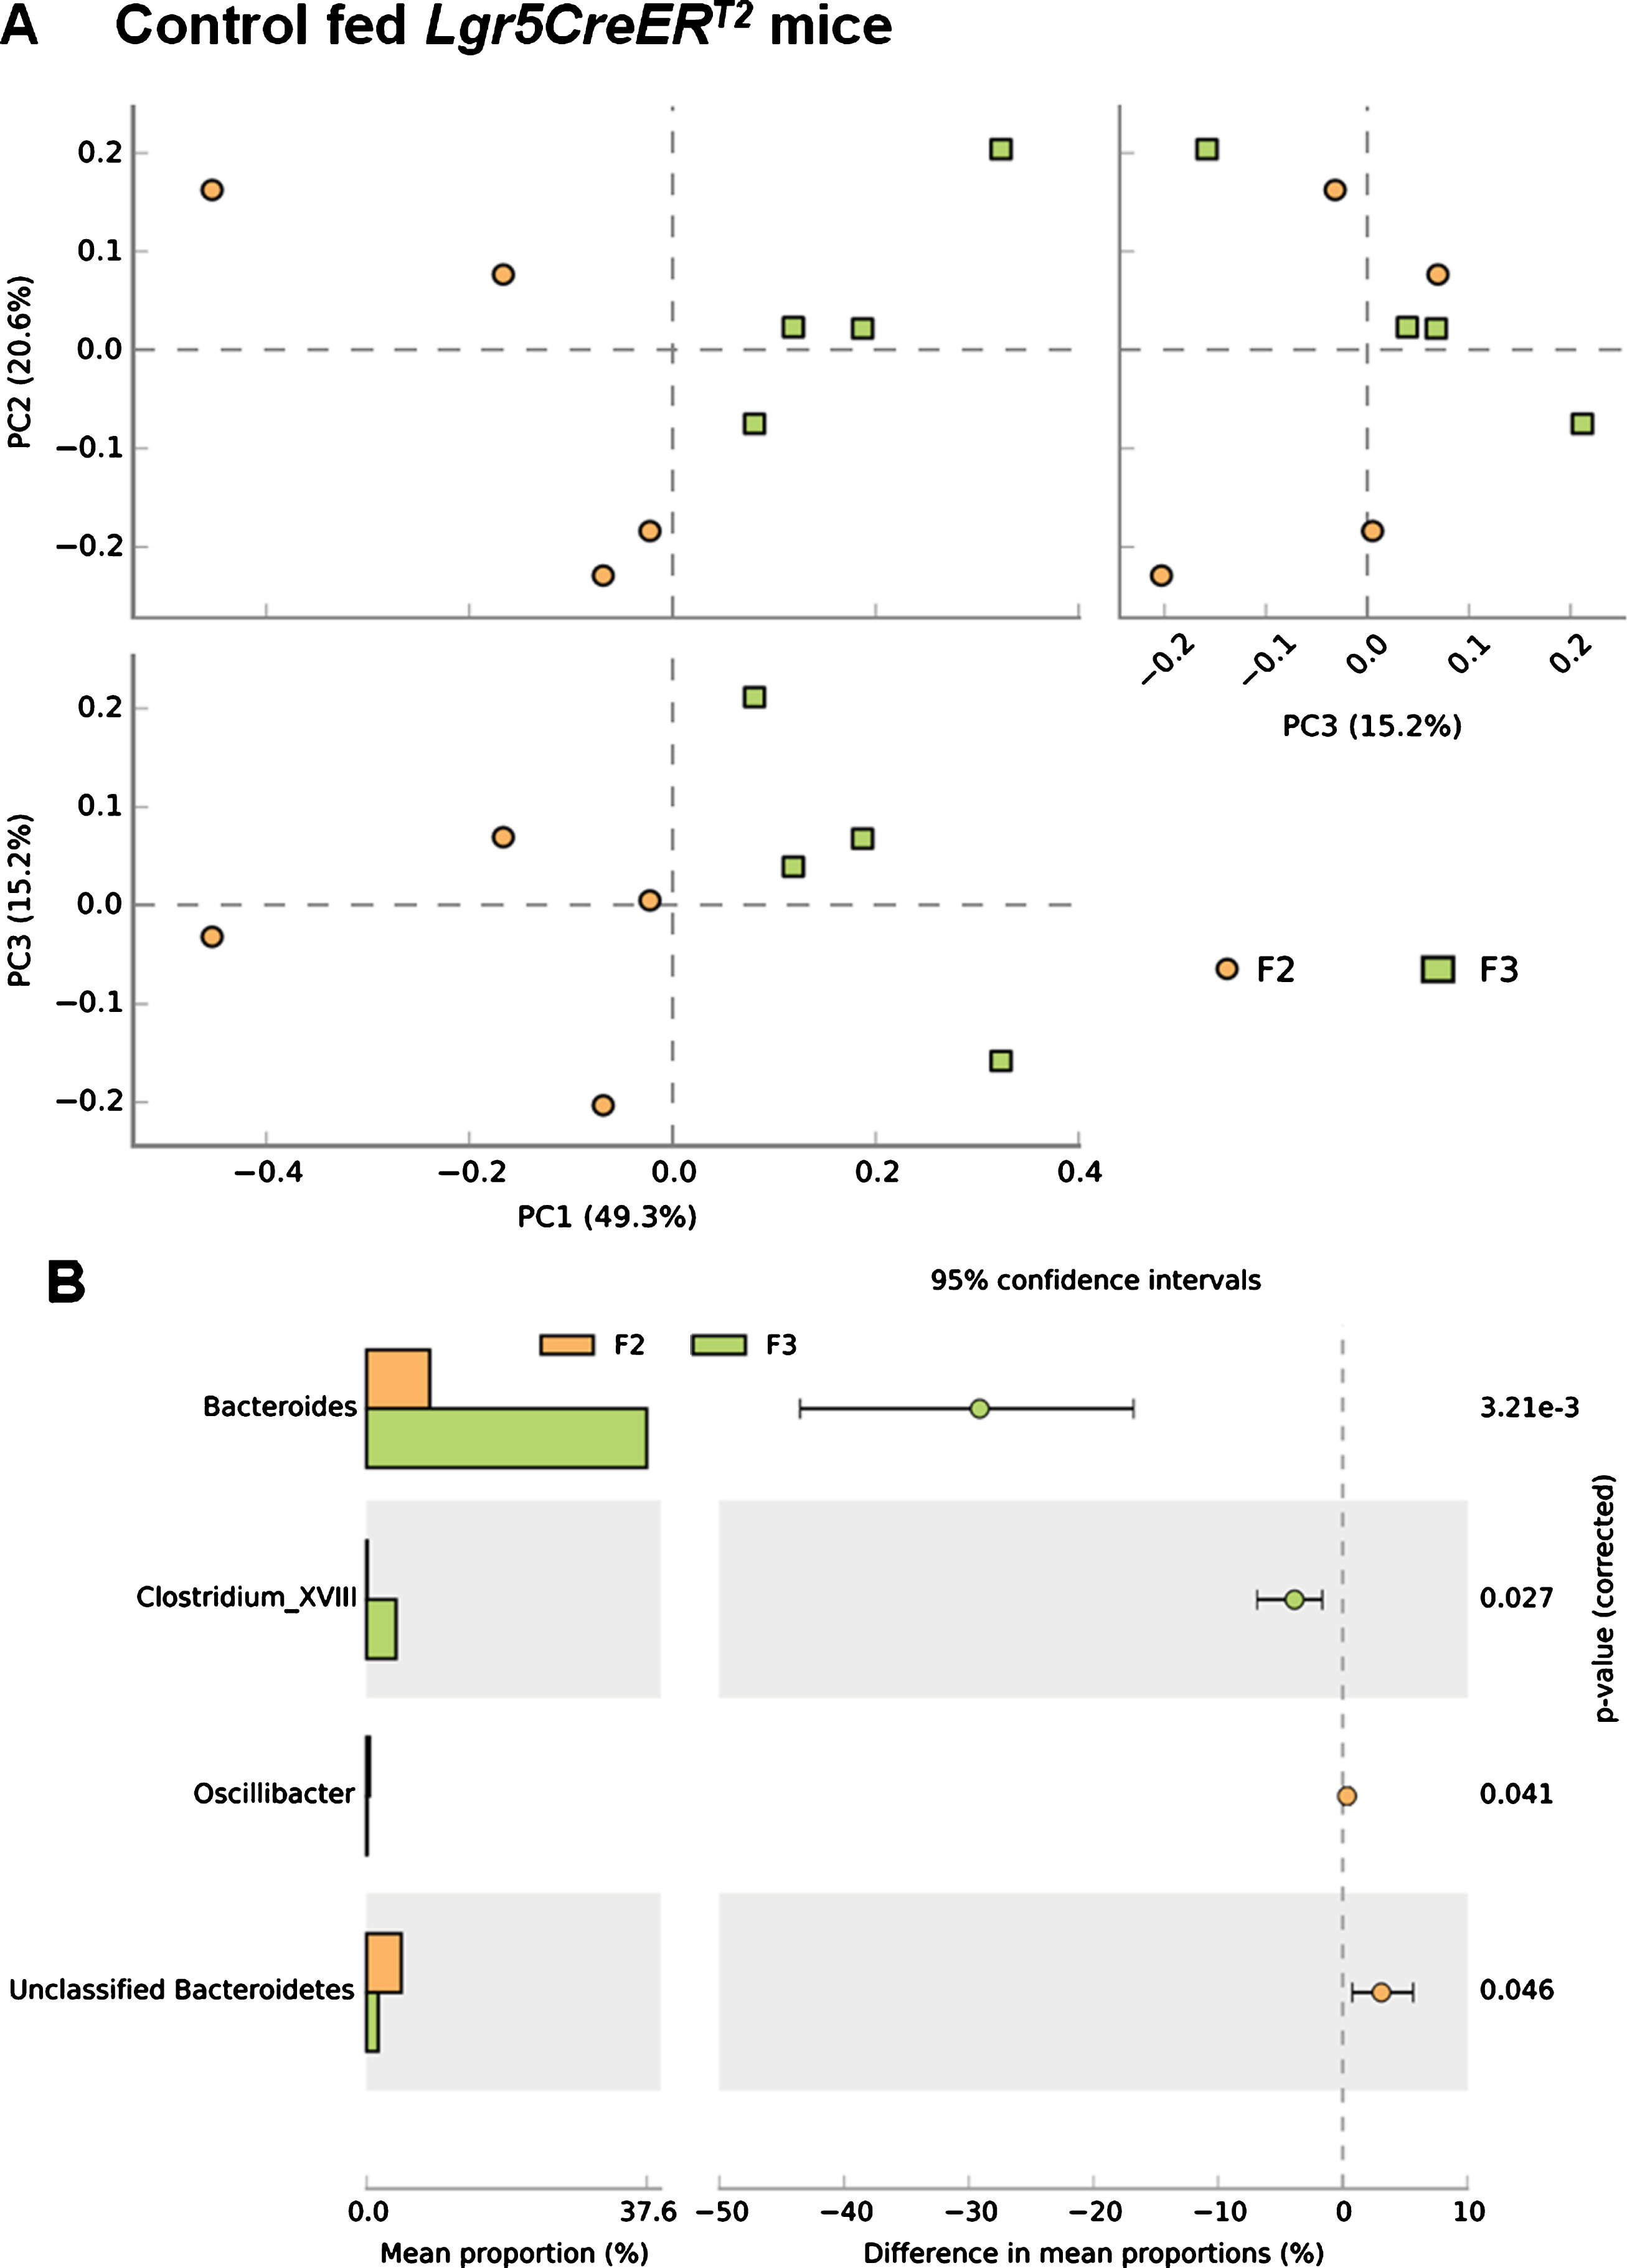 Loss of Apc from the ISC alters the microbial composition of the Lgr5CreERT2 Apcfl/fl intestine. (A) A PCA plot comparing faecal communities of control diet fed Lgr5CreERT2 Apcfl/fl mice before (; F2) and 20 days following Apc ISC deletion (; F3) demonstrates a clear separation of the two groups when PC1 vs PC2 and PC1 vs PC3 are plotted, further supported by PERMANOVA analysis in R. (B) Classification of sequences by taxonomy at the class levels indicates trends to support the changes in overall community structure but application of a FDR indicates the changes are not significant at the genus level. P values are pre-FDR corrected, error bars represent 95% confidence intervals using the DP:bootstrap method. N = 4 mice fed control diet per faecal sampling time point, note this is longitudinal faecal sampling from the same mice at different time points.